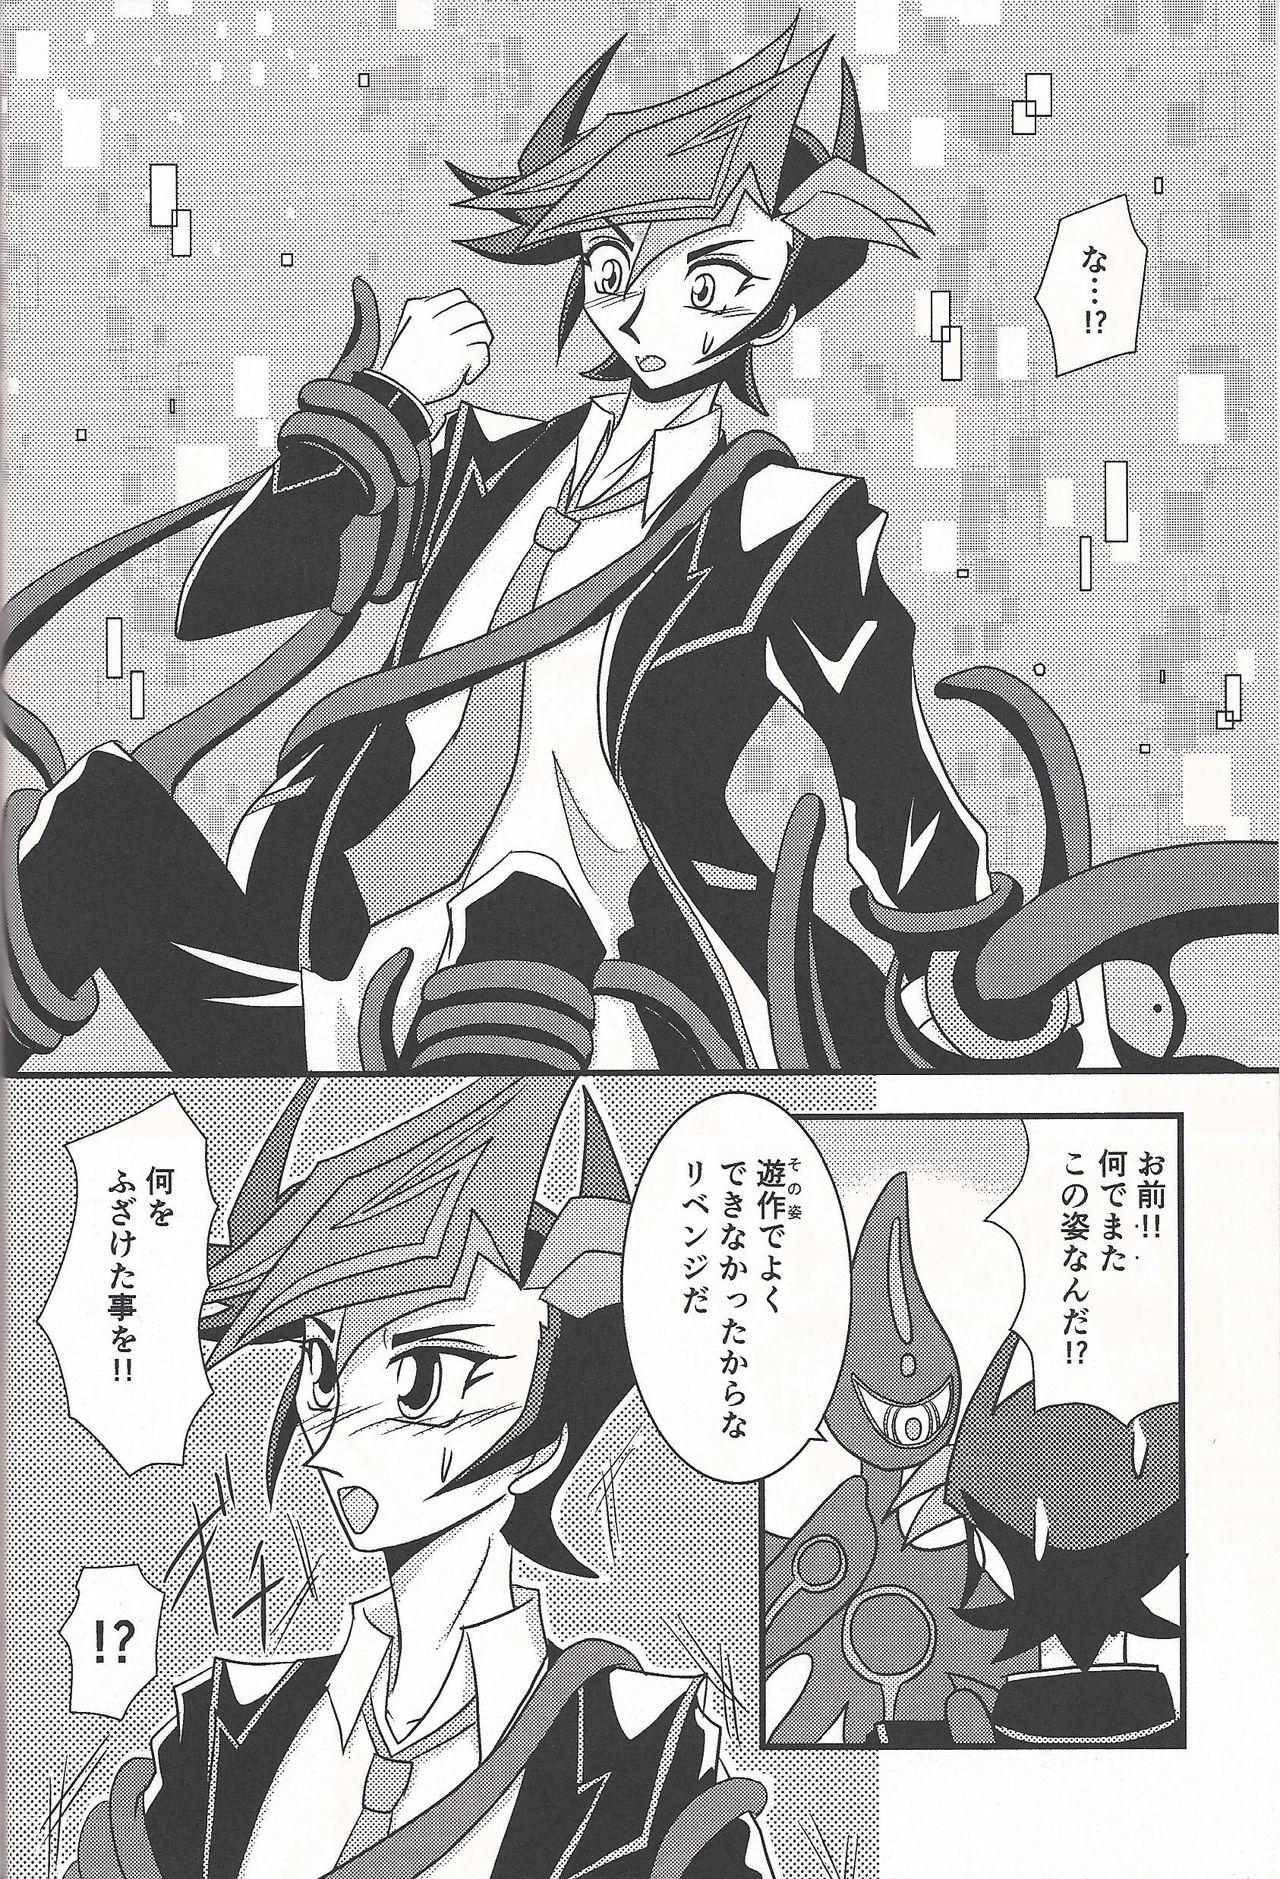 Adorable Mirrors gate - Yu gi oh vrains Machine - Page 9